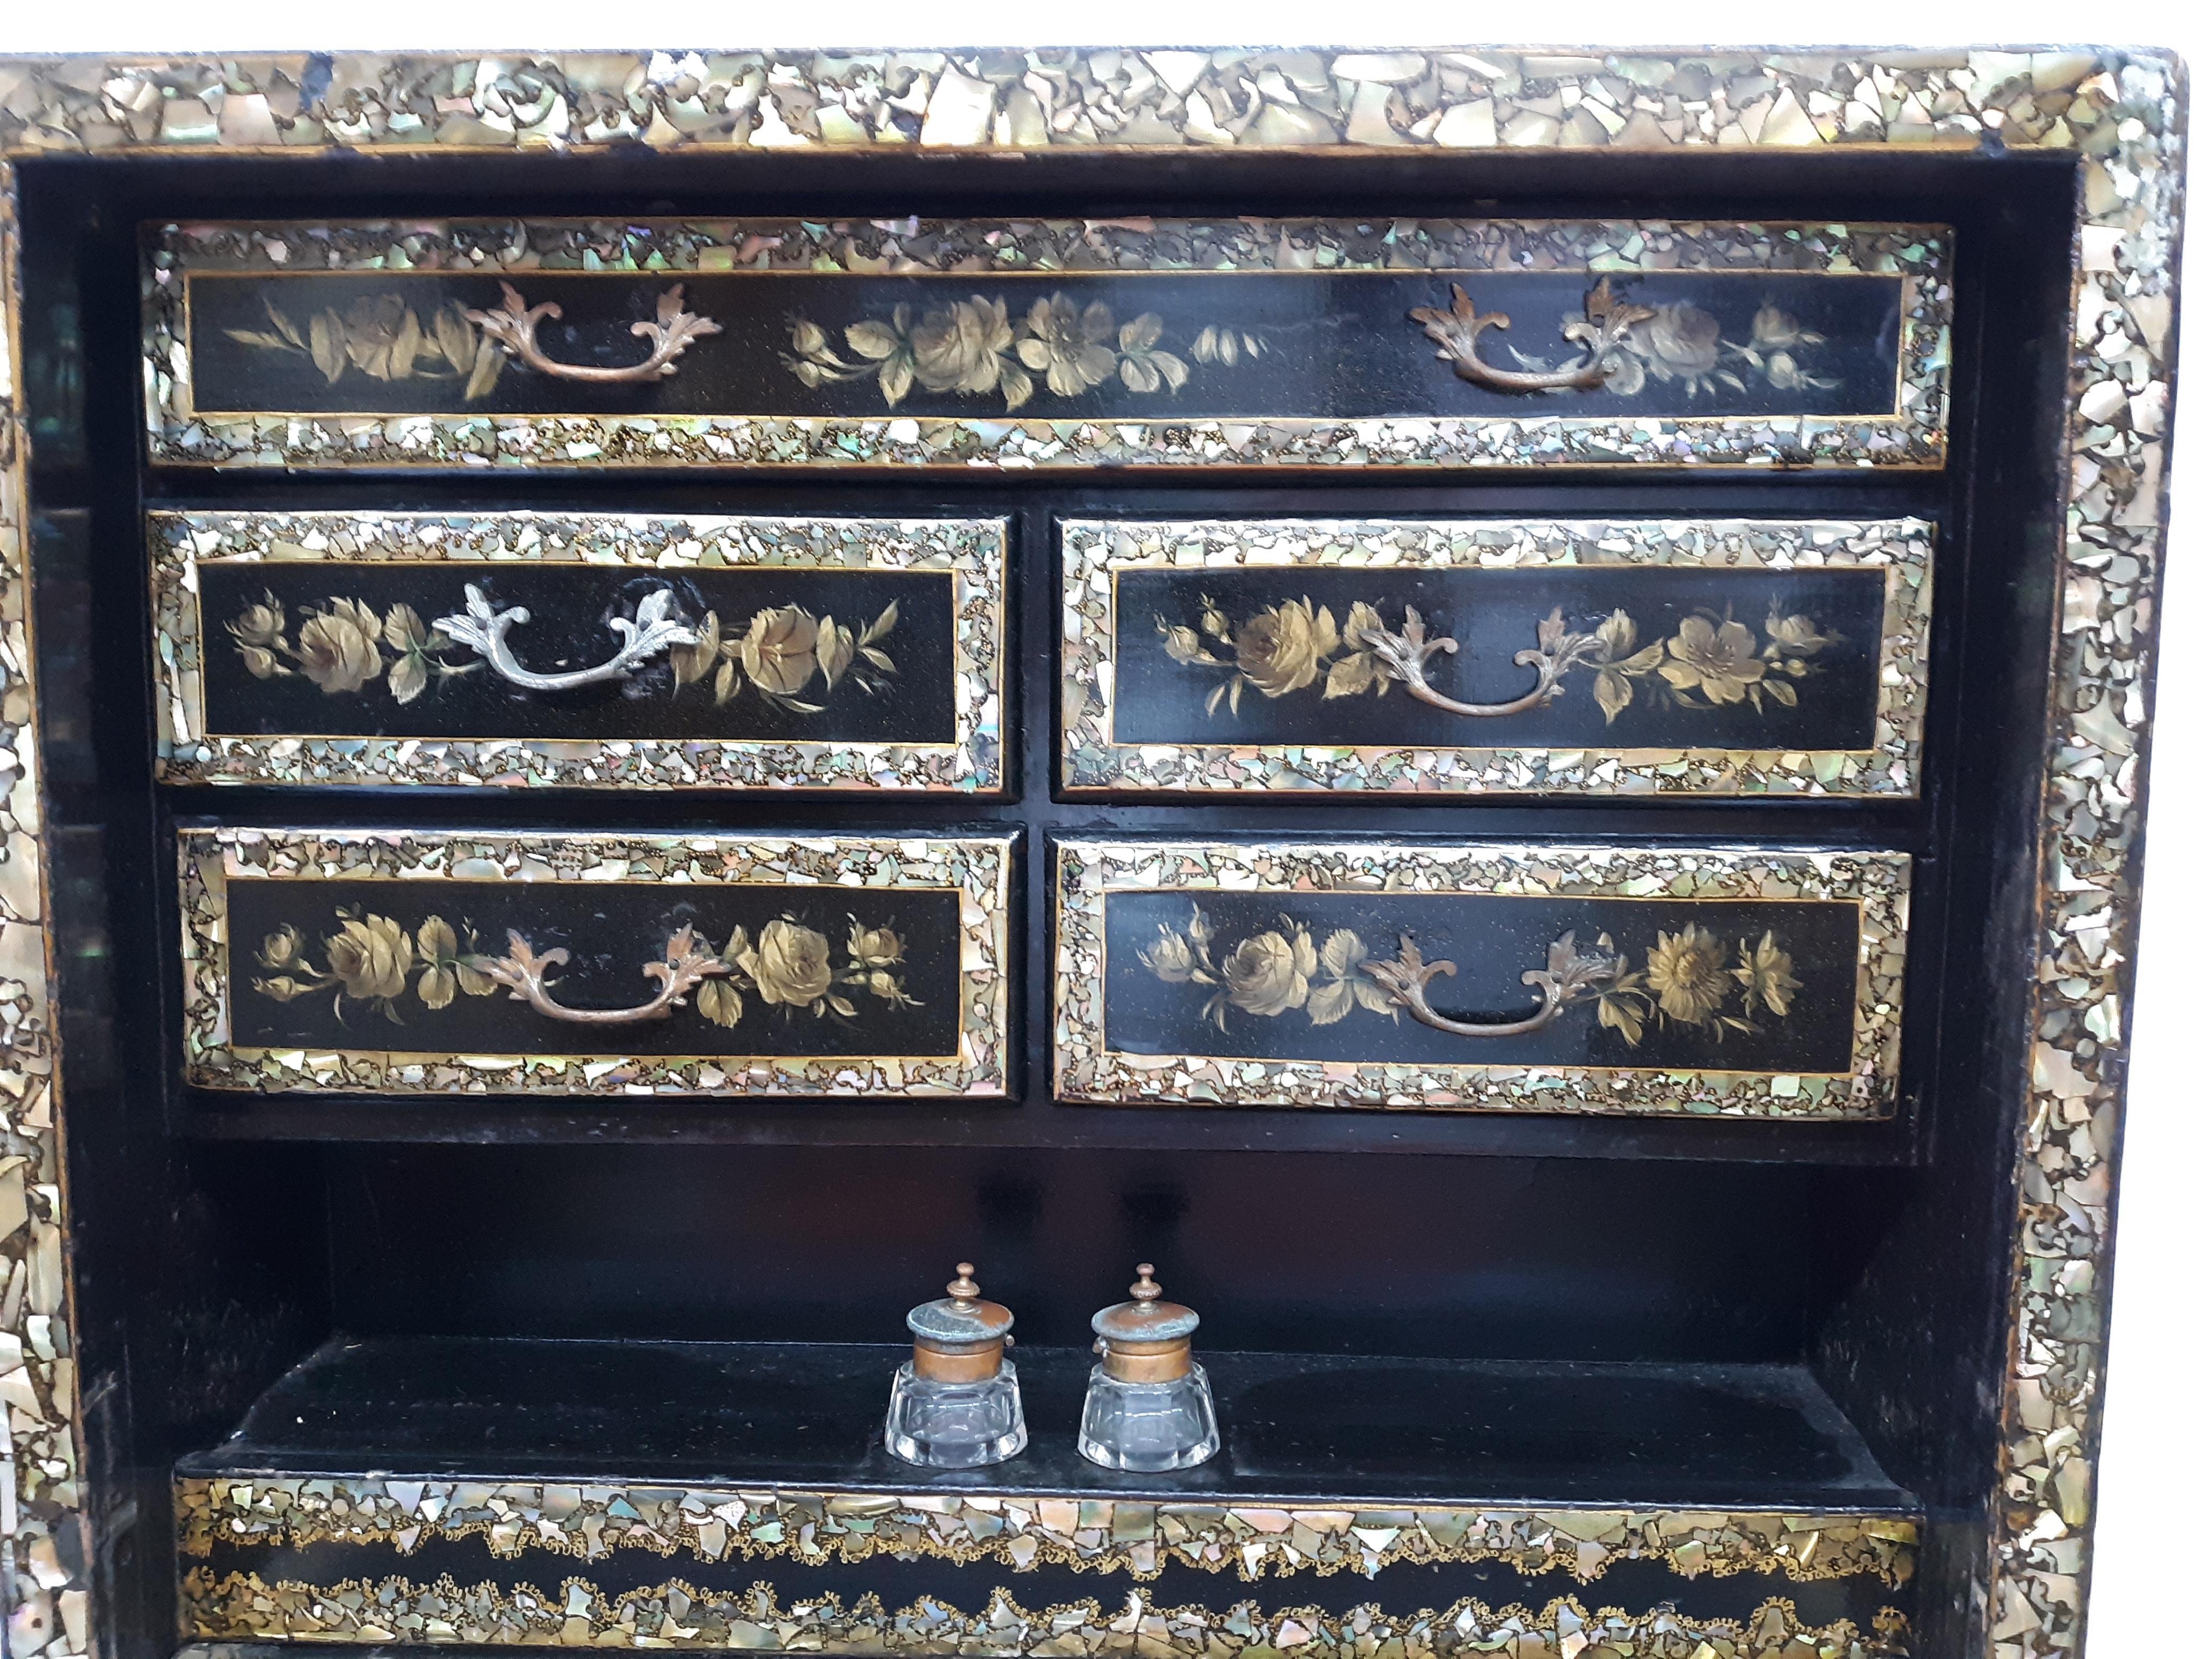 Early 1800 Ladies Perfume, Makeup and Jewelry Table with Inlaid Mother of Pearl For Sale 3